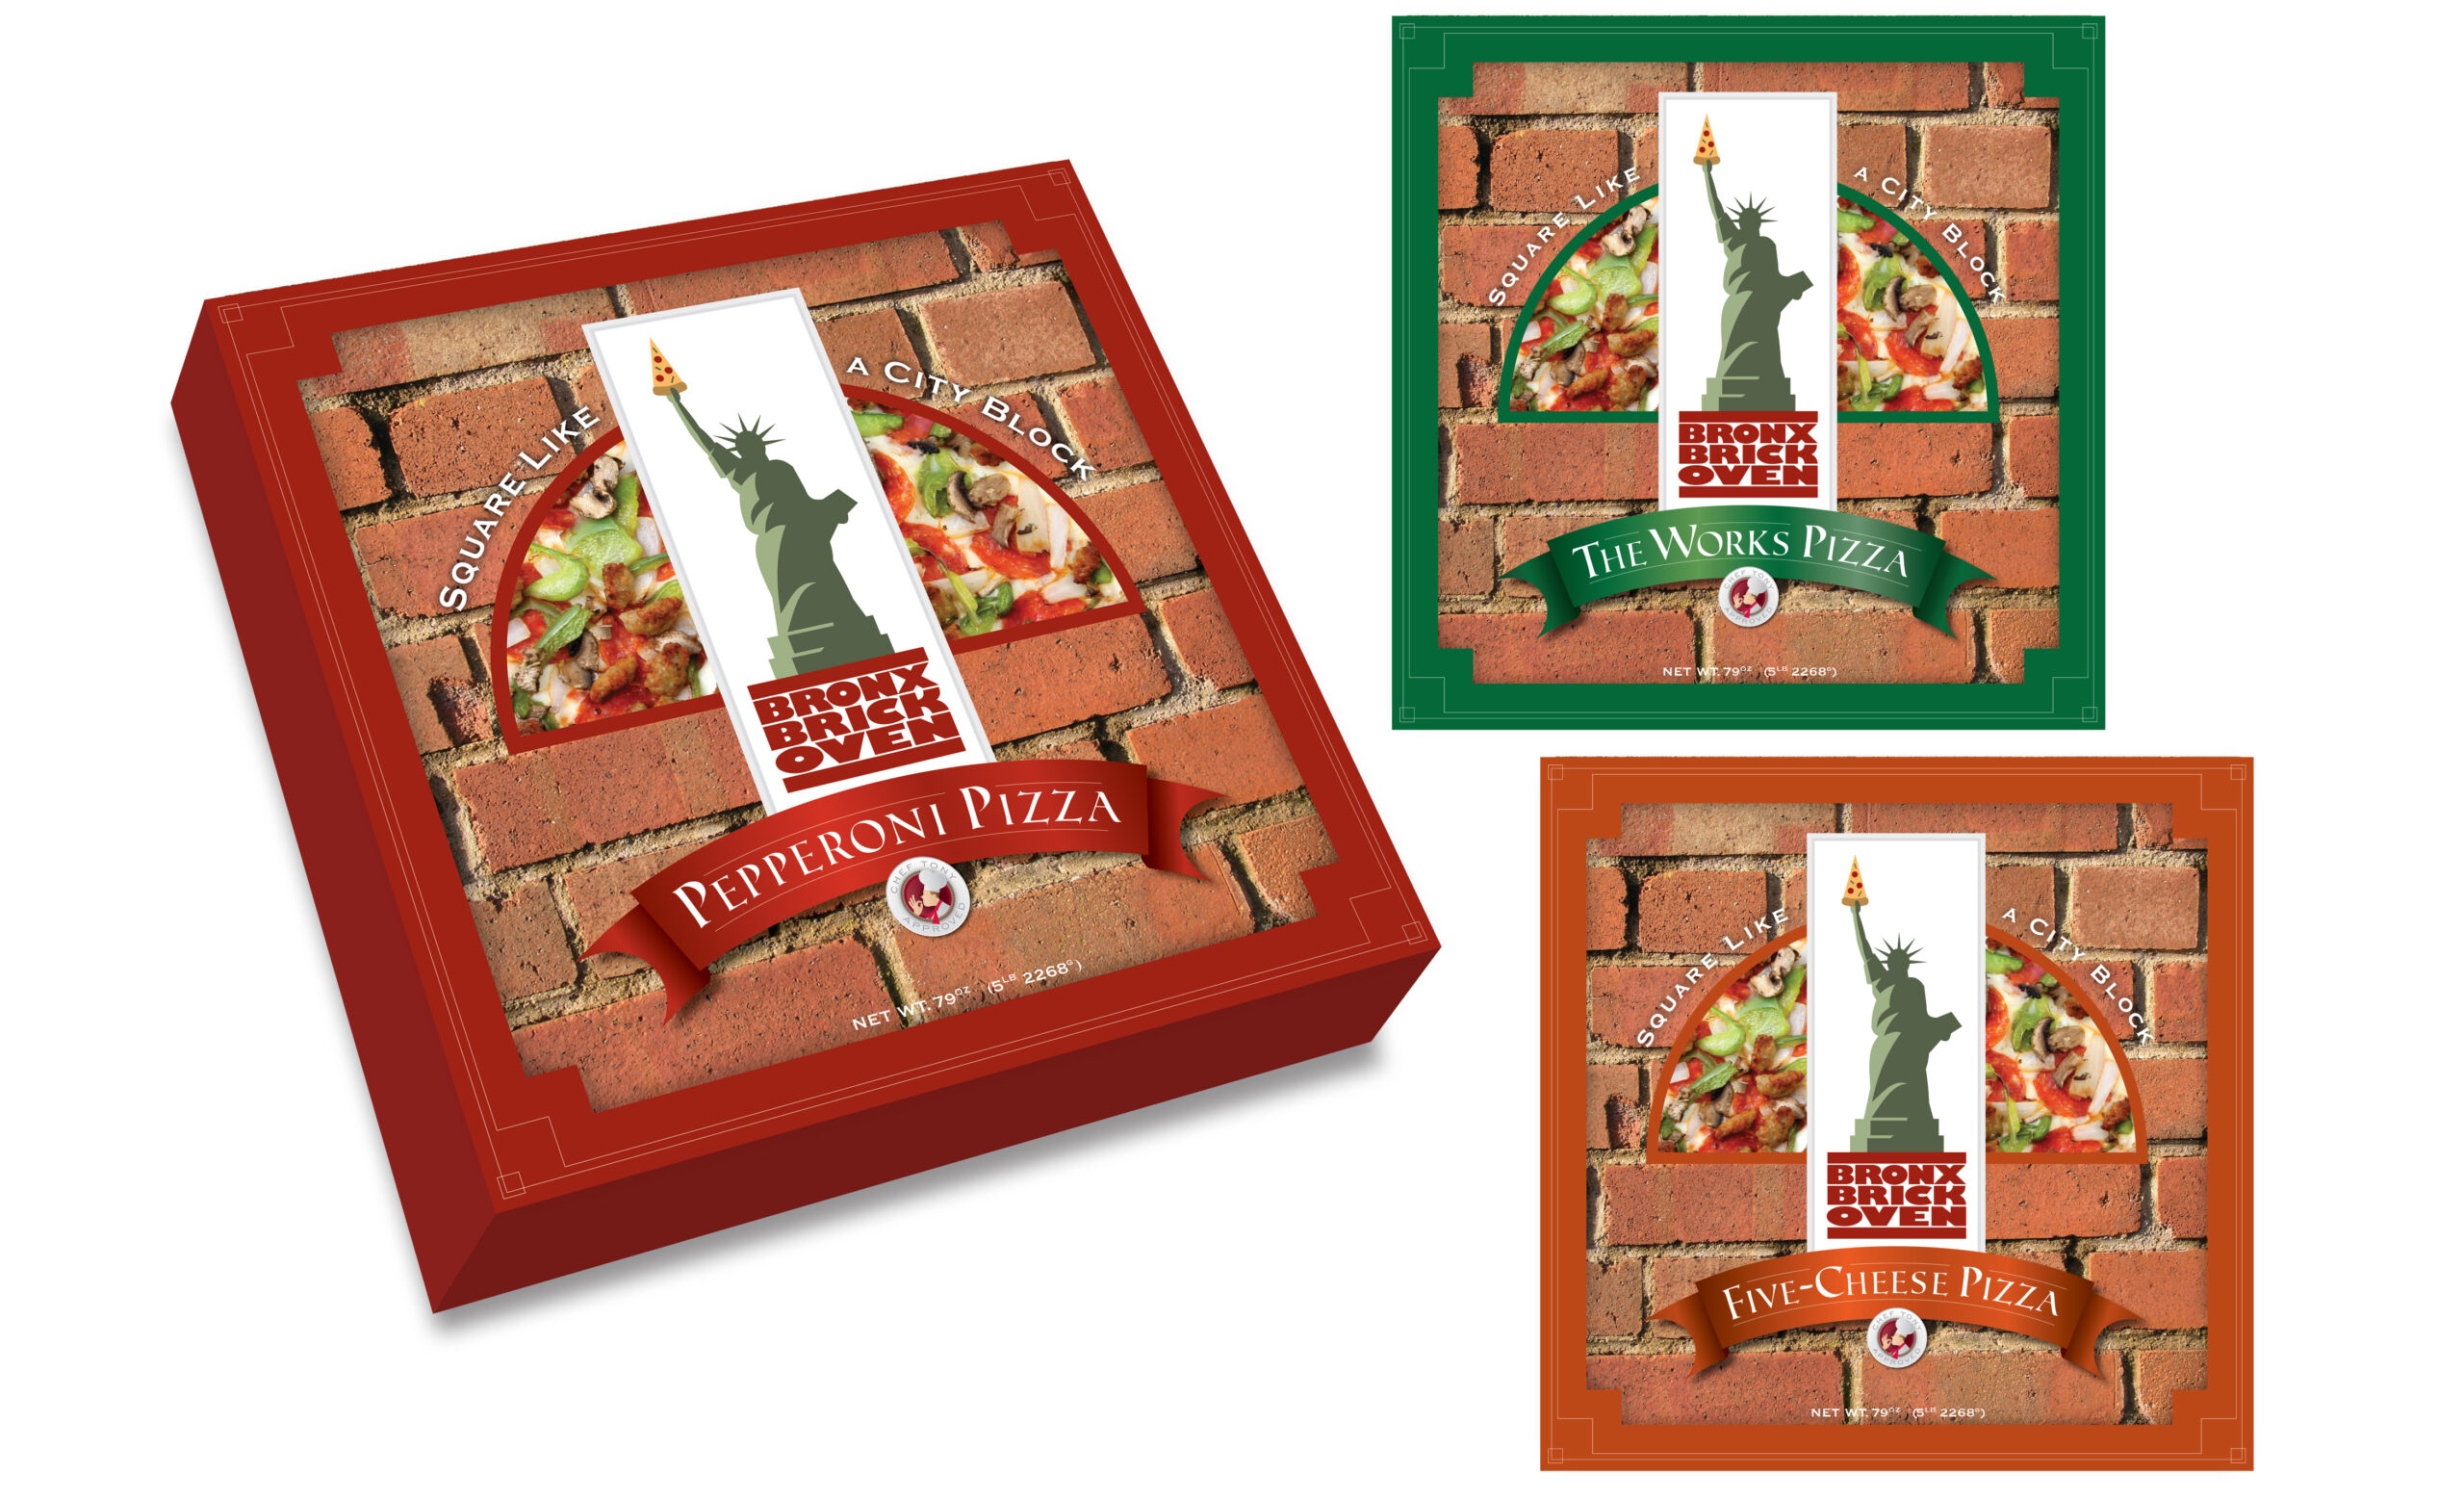 Bronx Brick Oven Pizza packaging